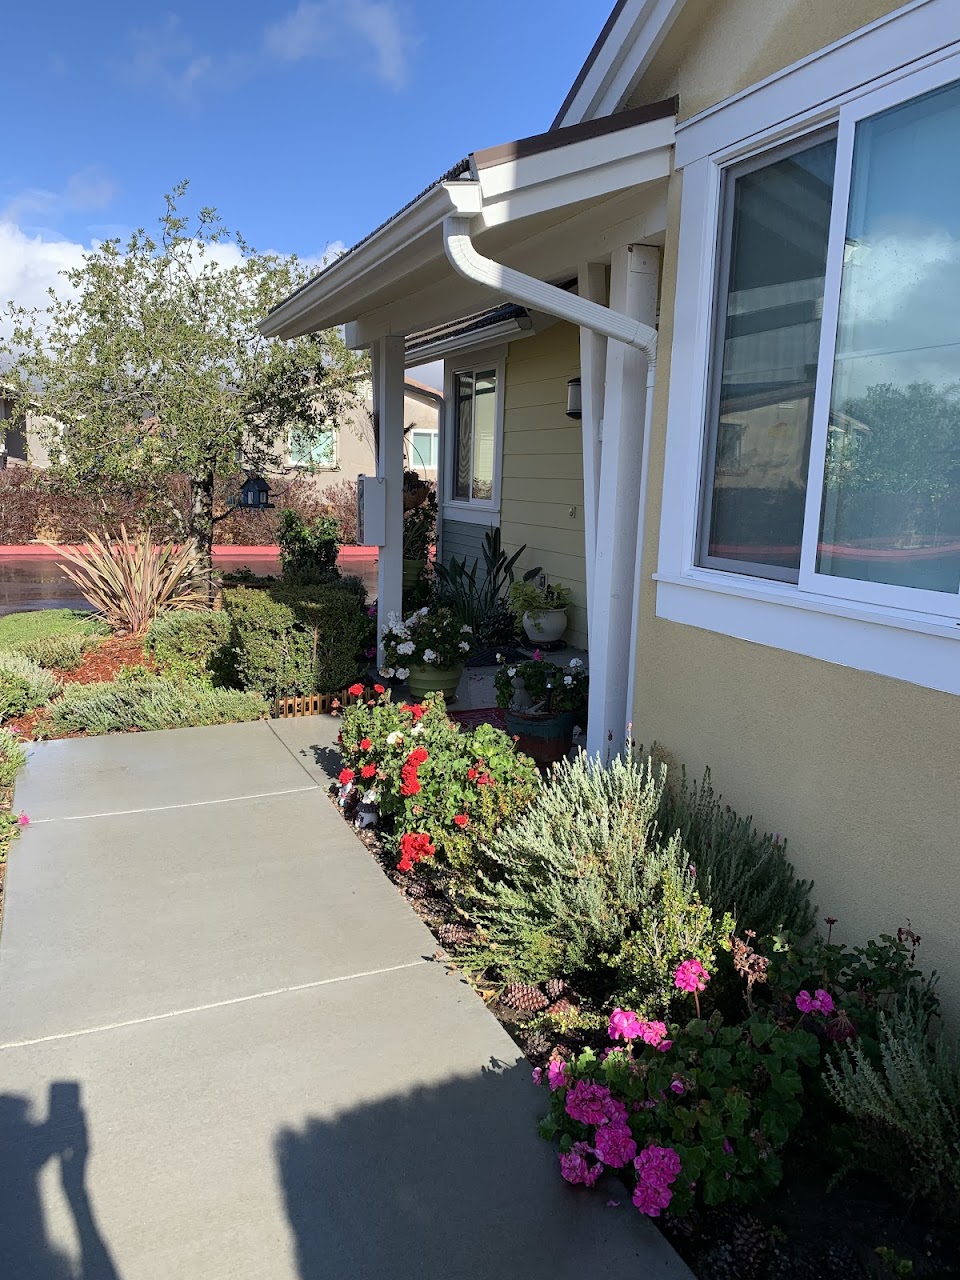 Photo of CAMINO ESPERANZA. Affordable housing located at 1372 KATHERINE ROAD SOUTH SIMI VALLEY, CA 93063